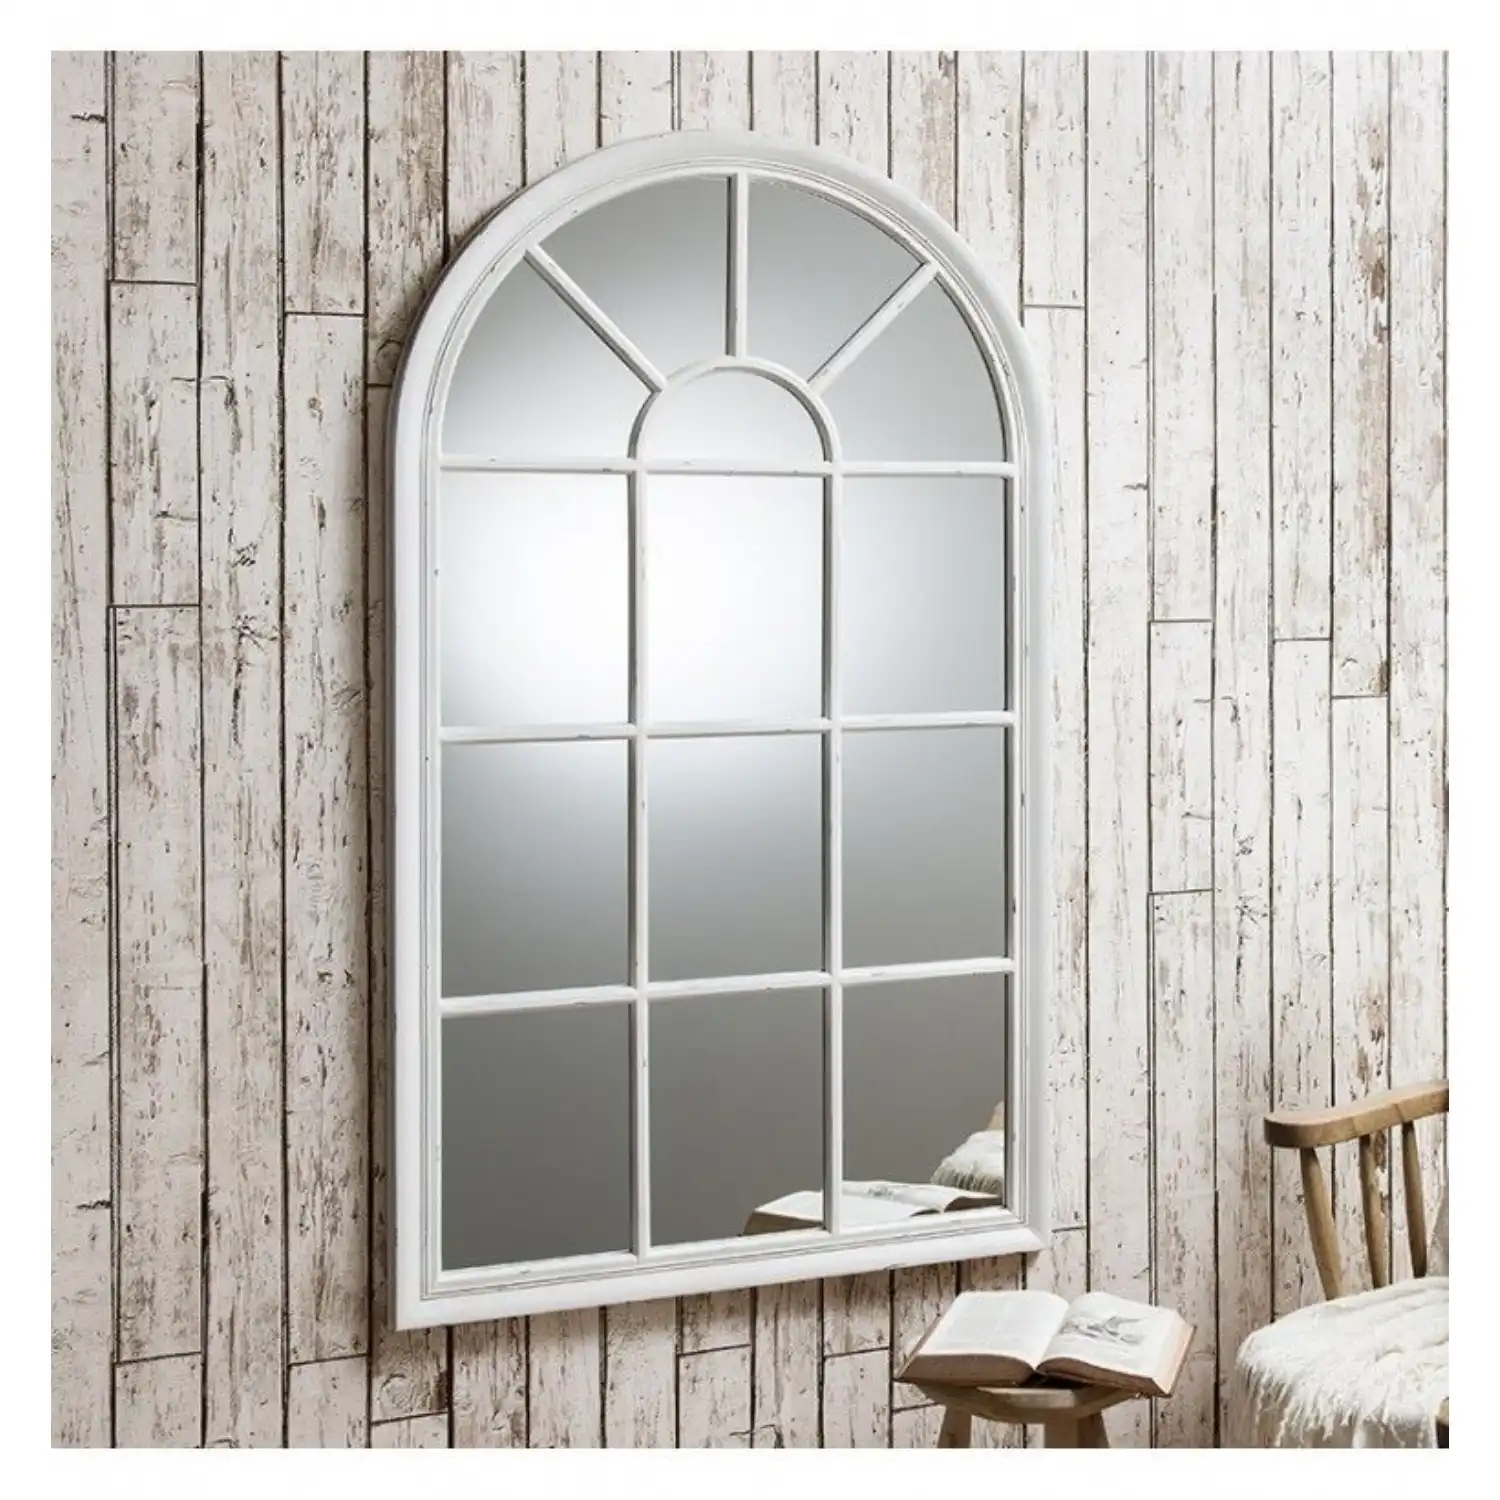 Large Arched Multi Window Wall Mirror White Crackle Distressed Texture